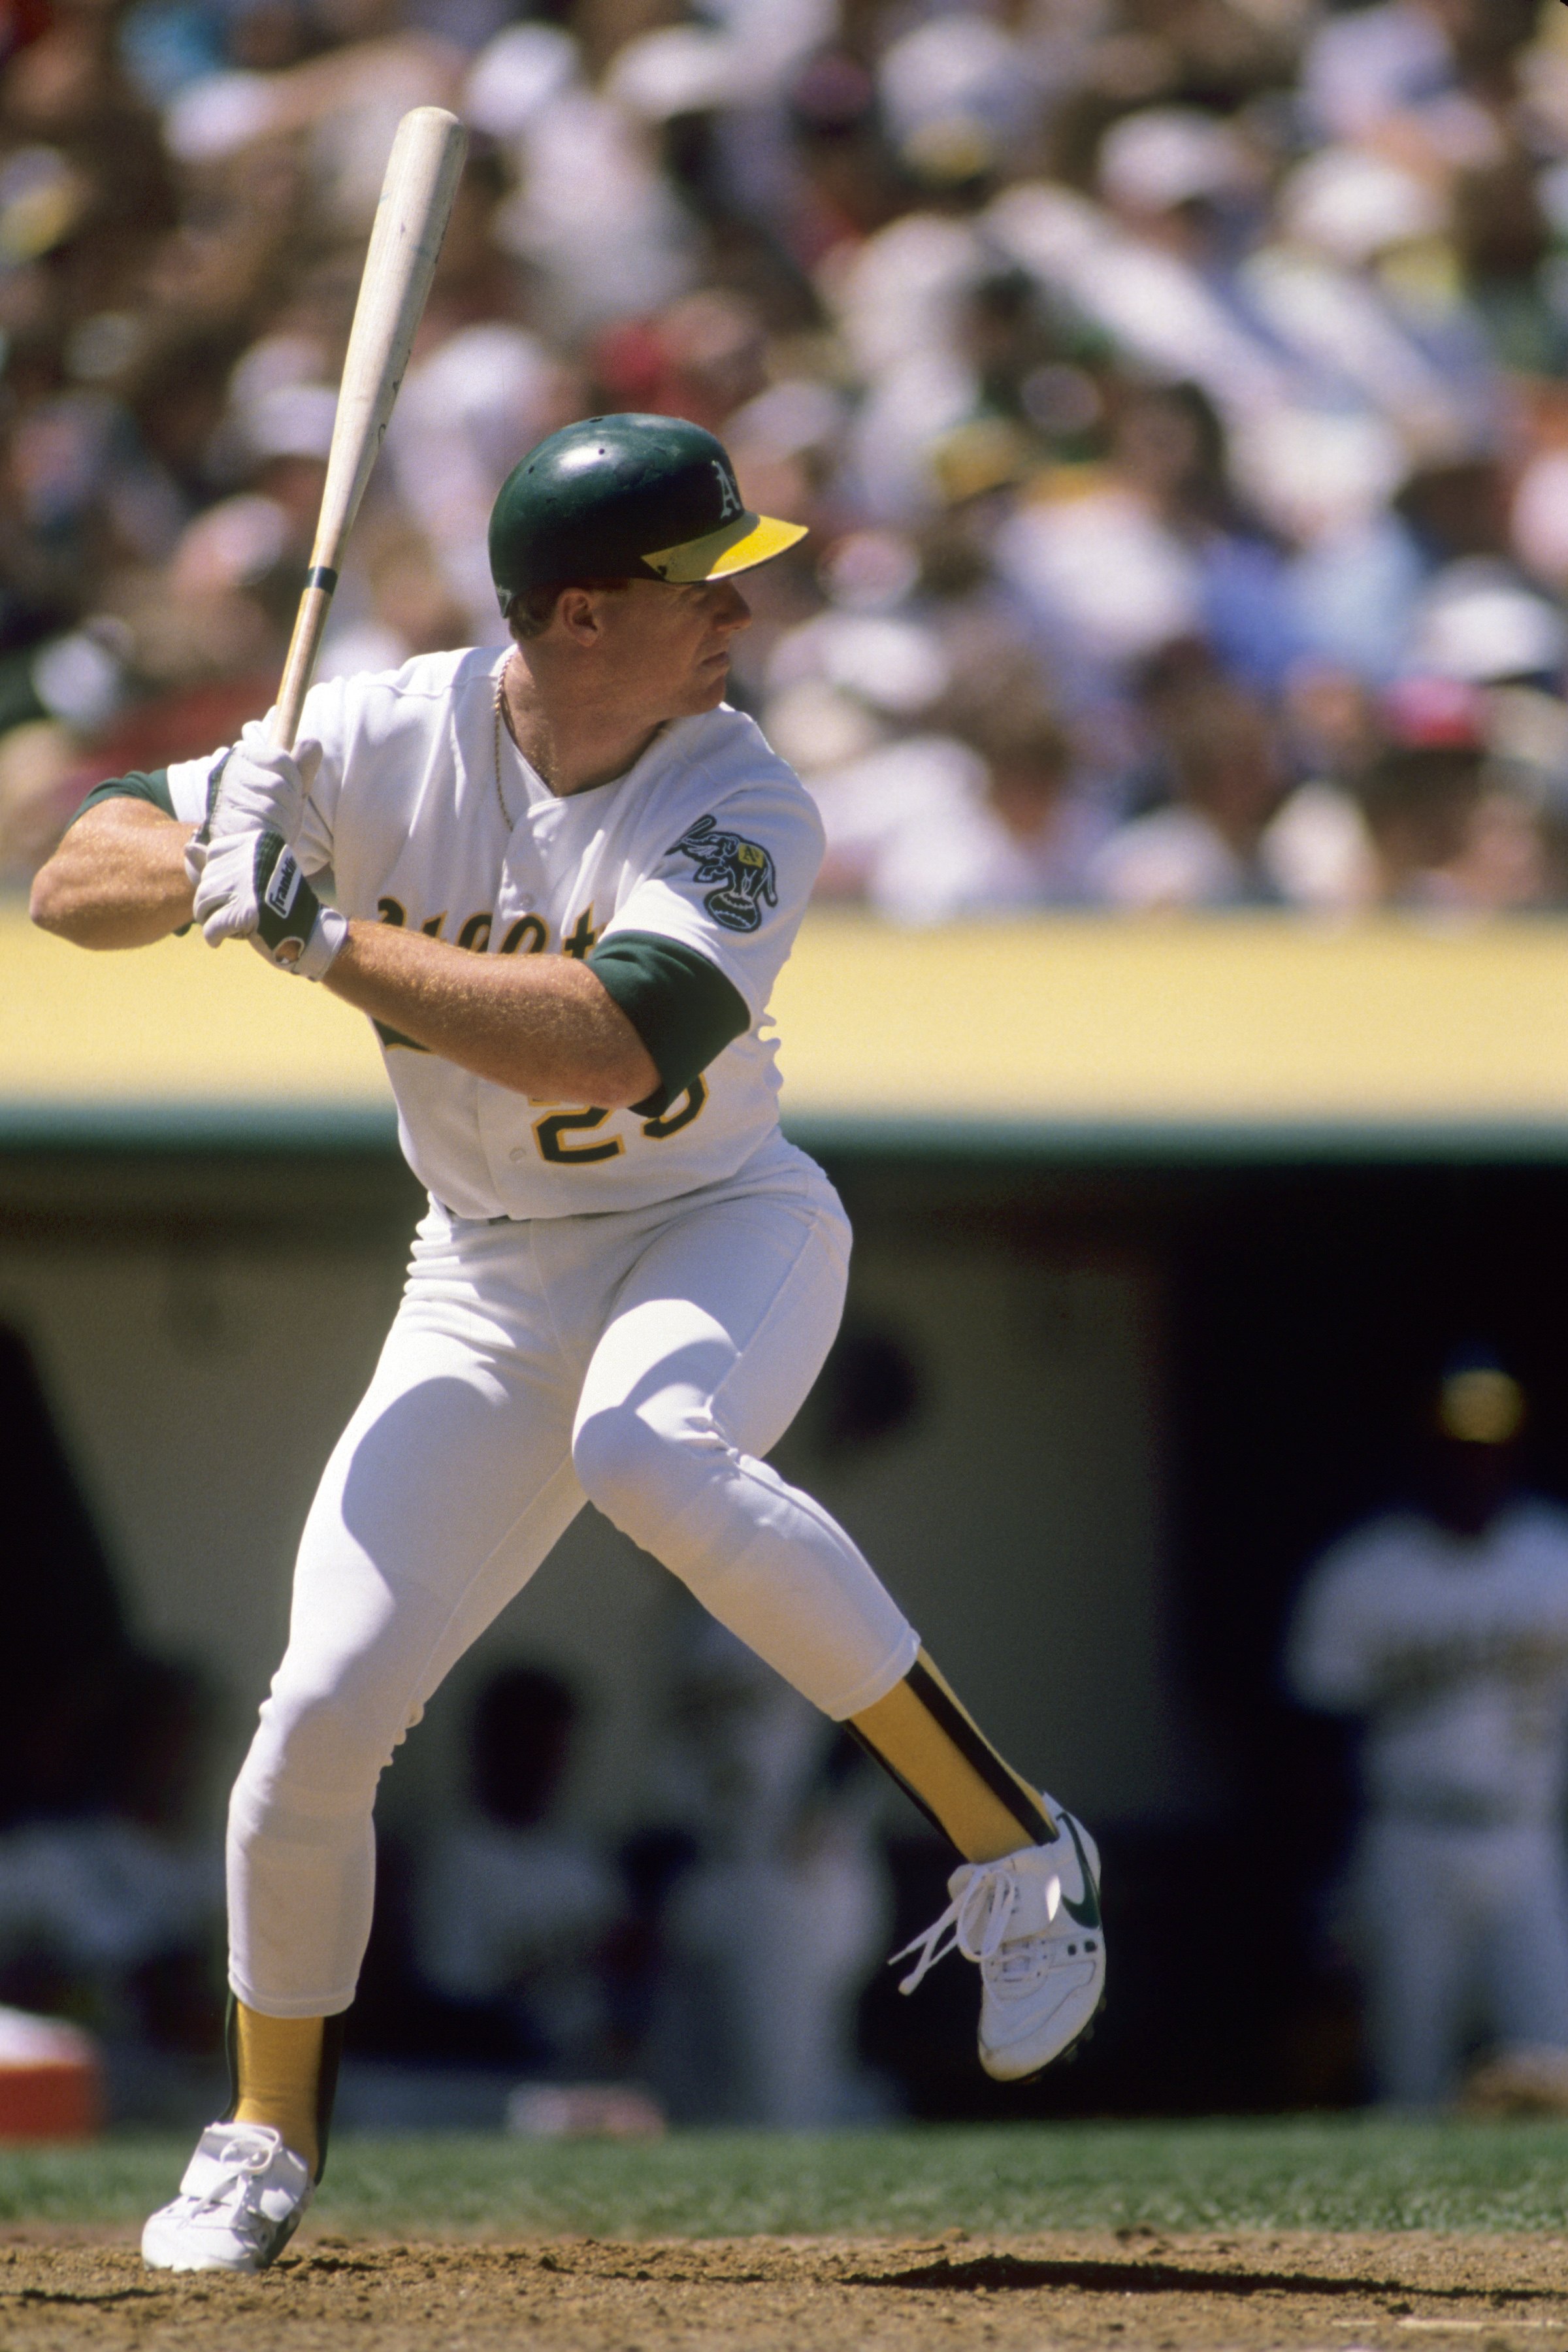 AP: Jay McGwire says drugs aided big brother Mark 